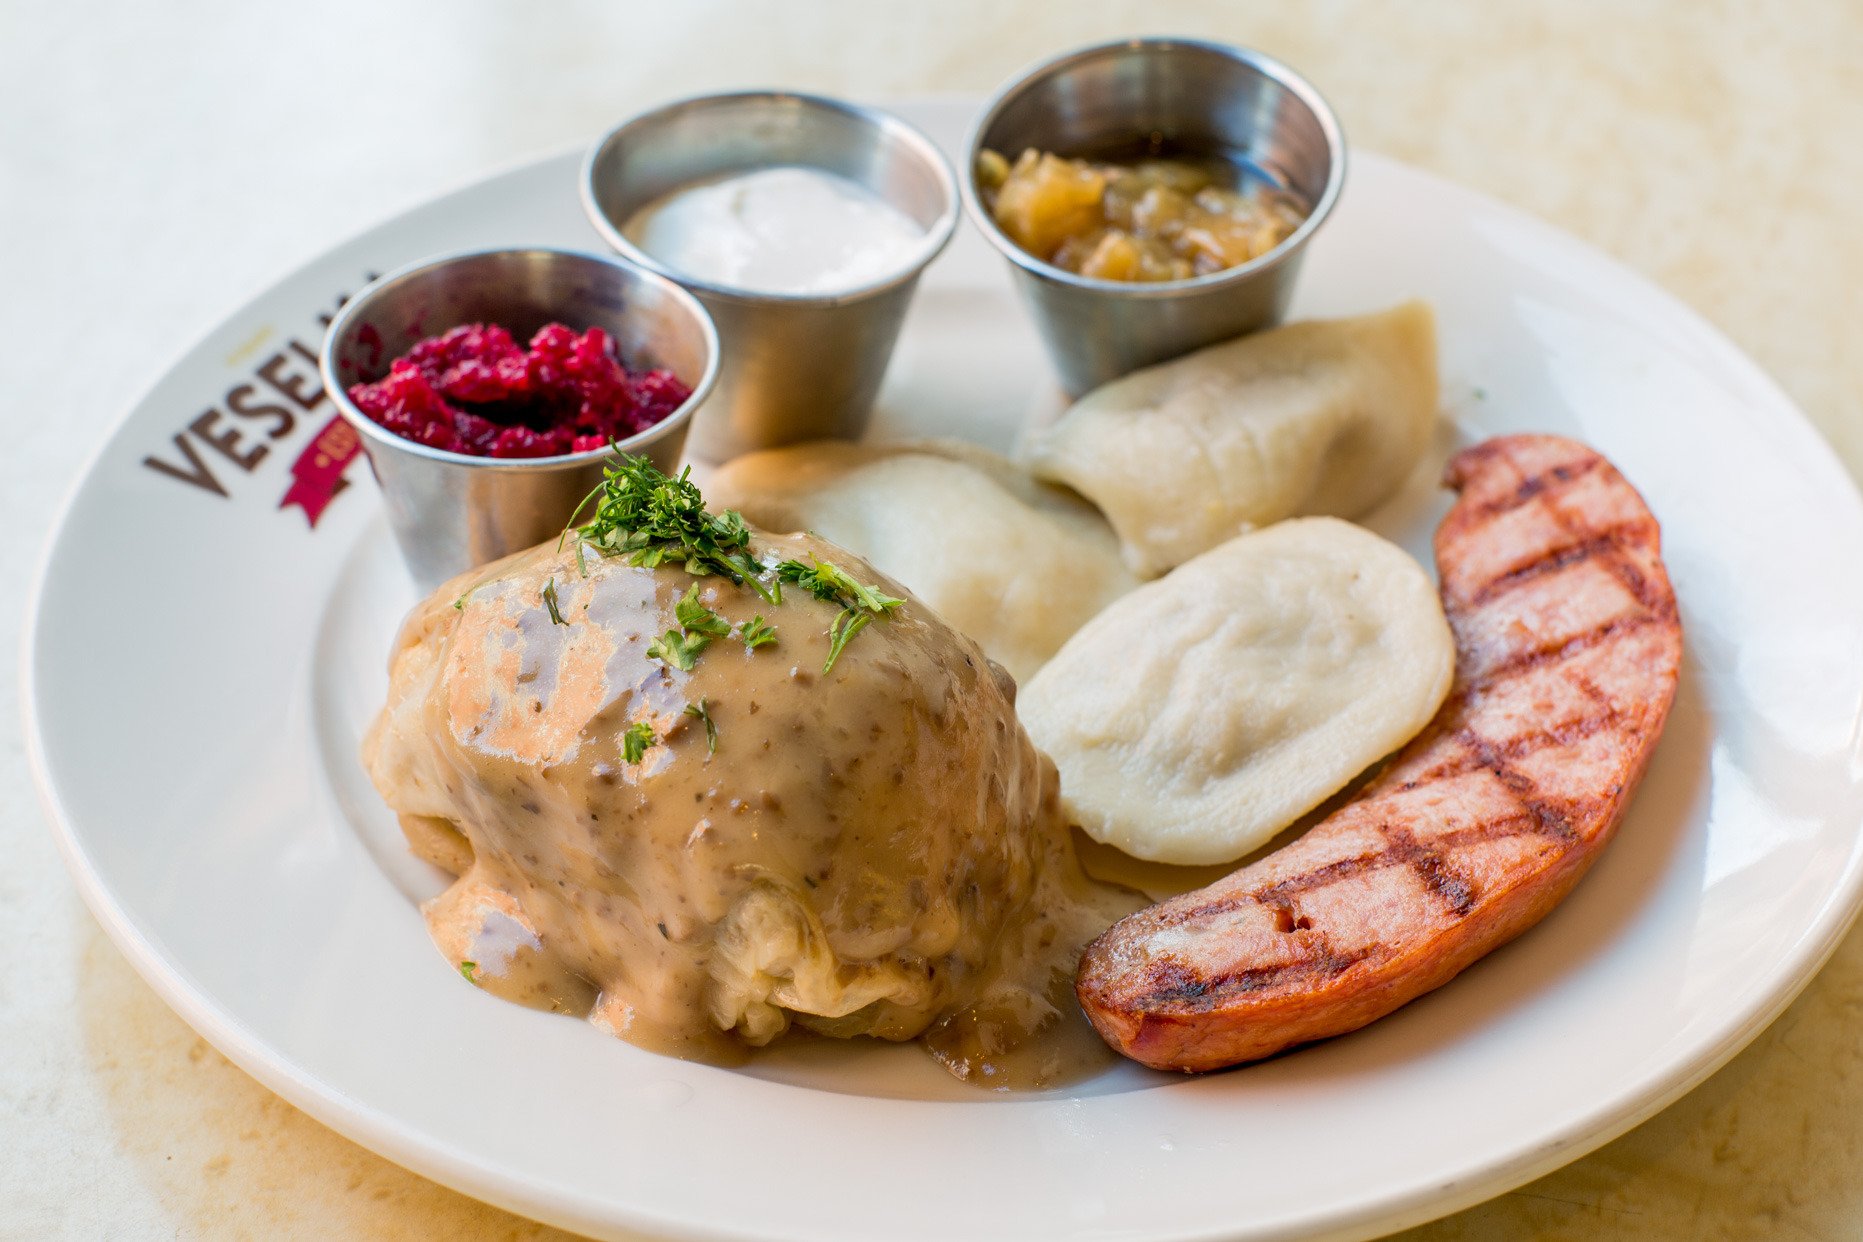 Food open late. Veselka is famous for their hearty and authentic dishes.